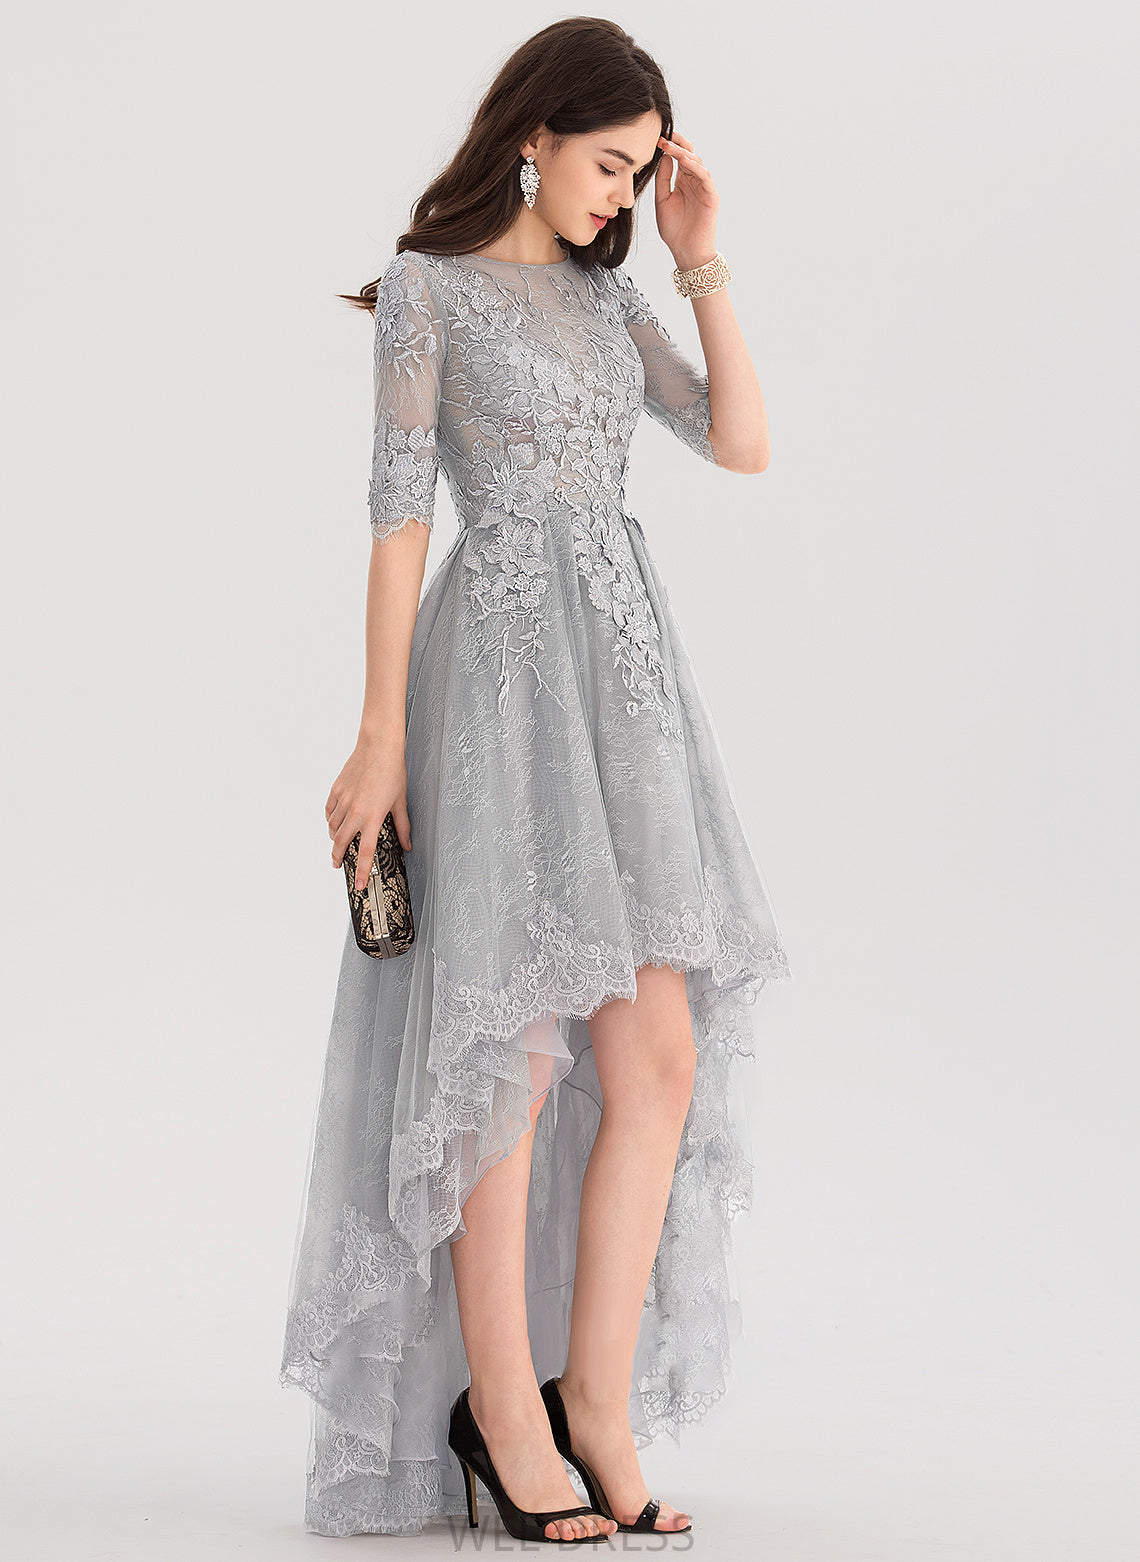 Scoop Ball-Gown/Princess Matilda Neck Asymmetrical Tulle Lace Prom Dresses